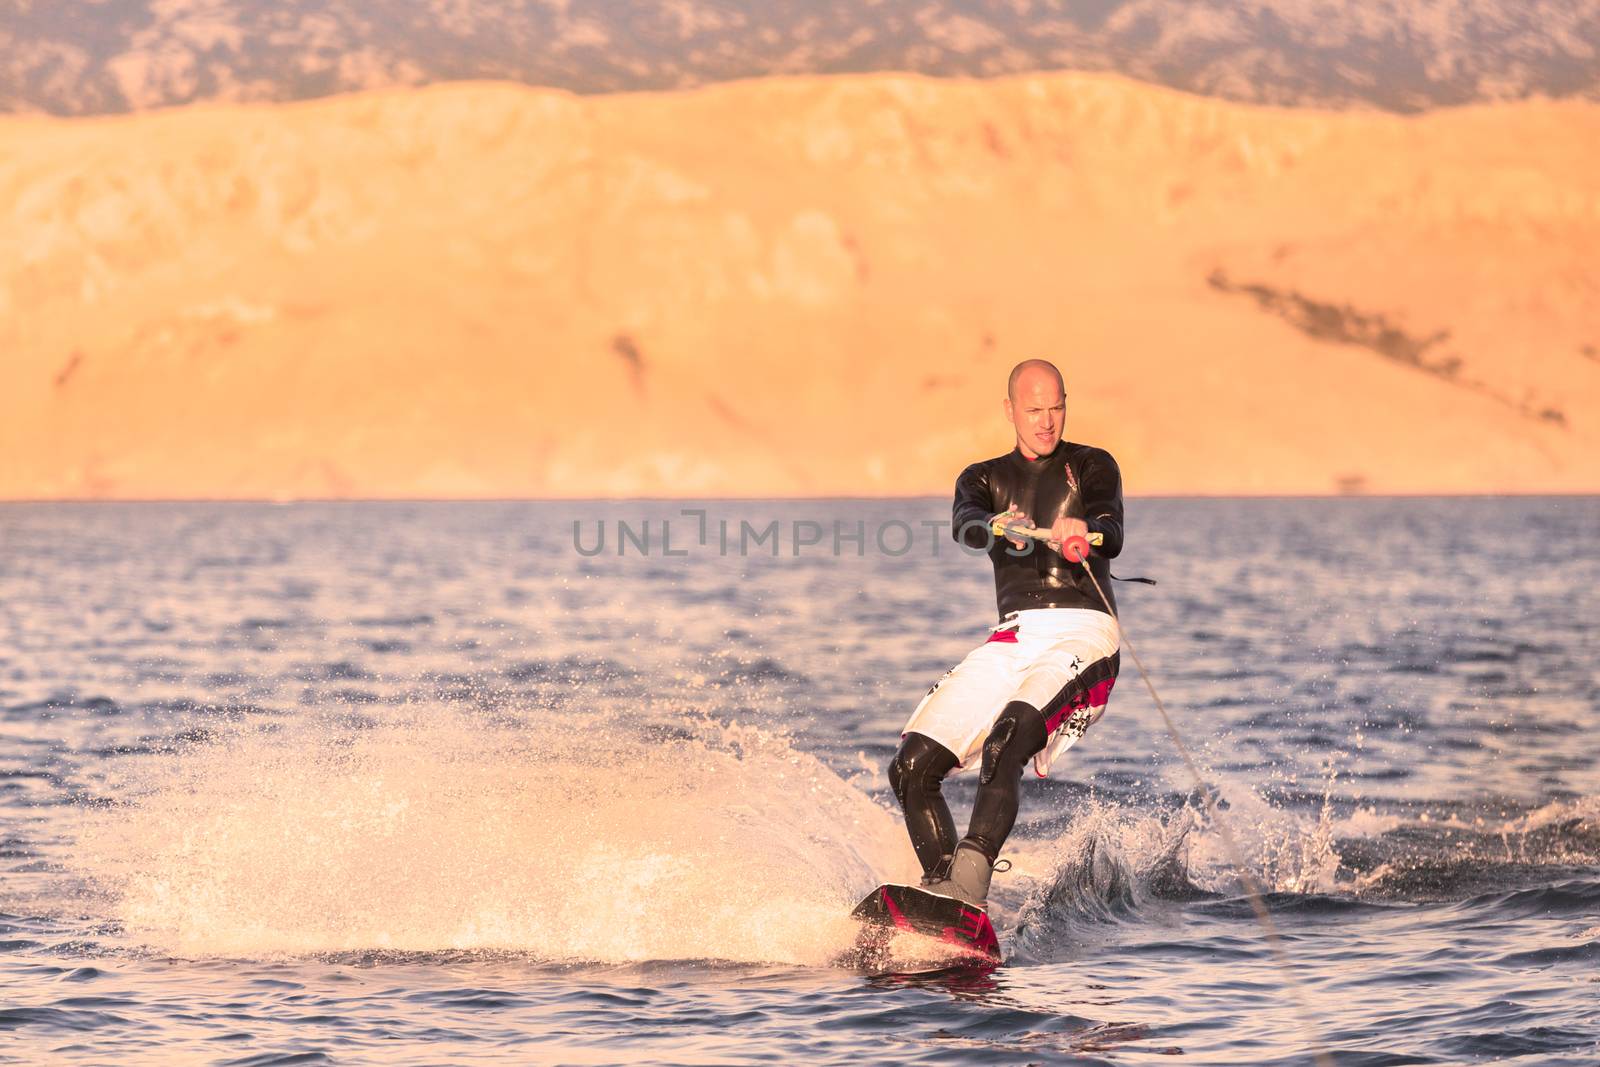 Wakeboarder in sunset. by kasto